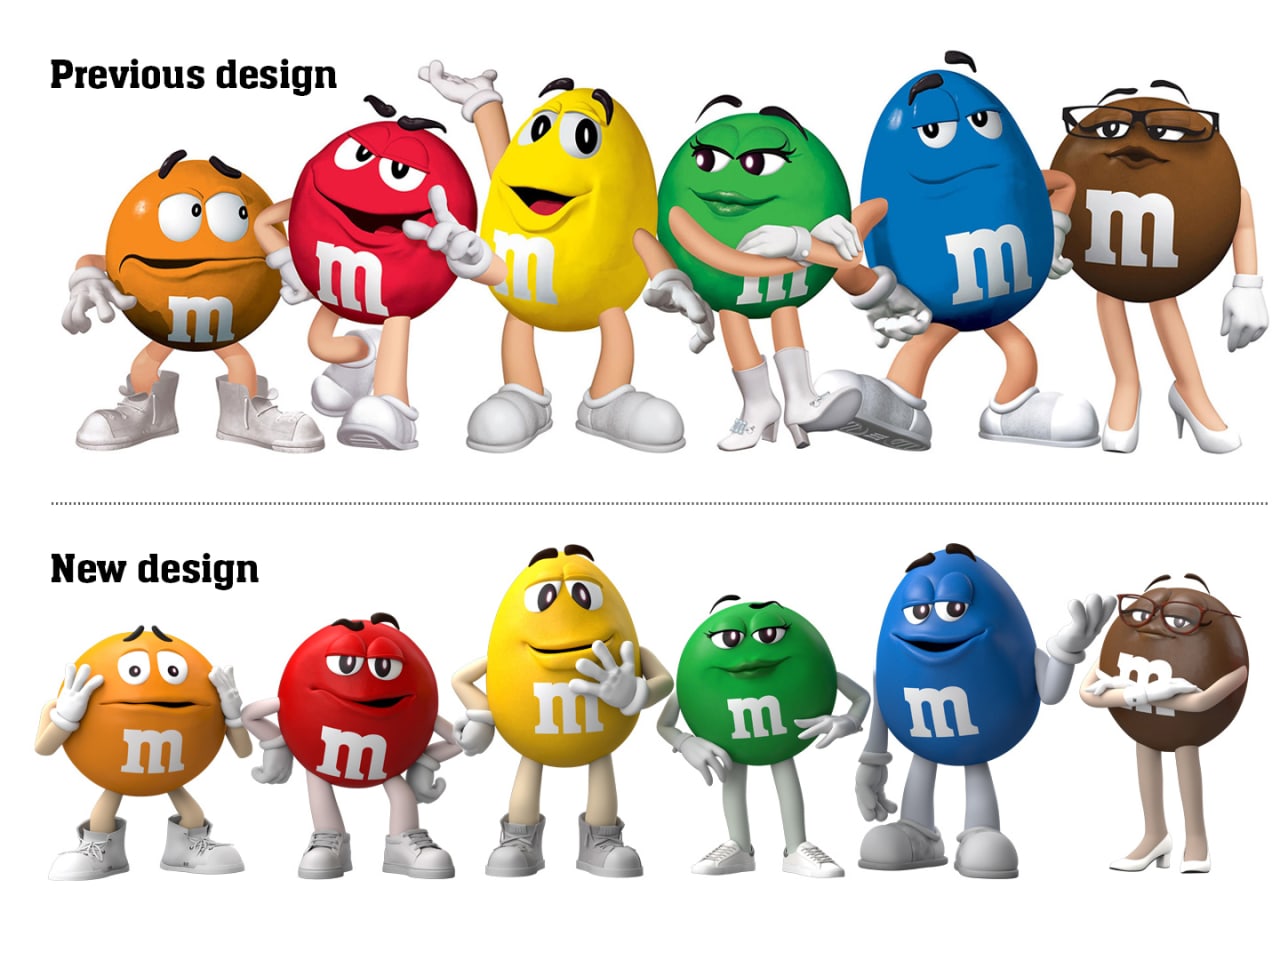 Why People Are Mocking the New M&Ms Characters 